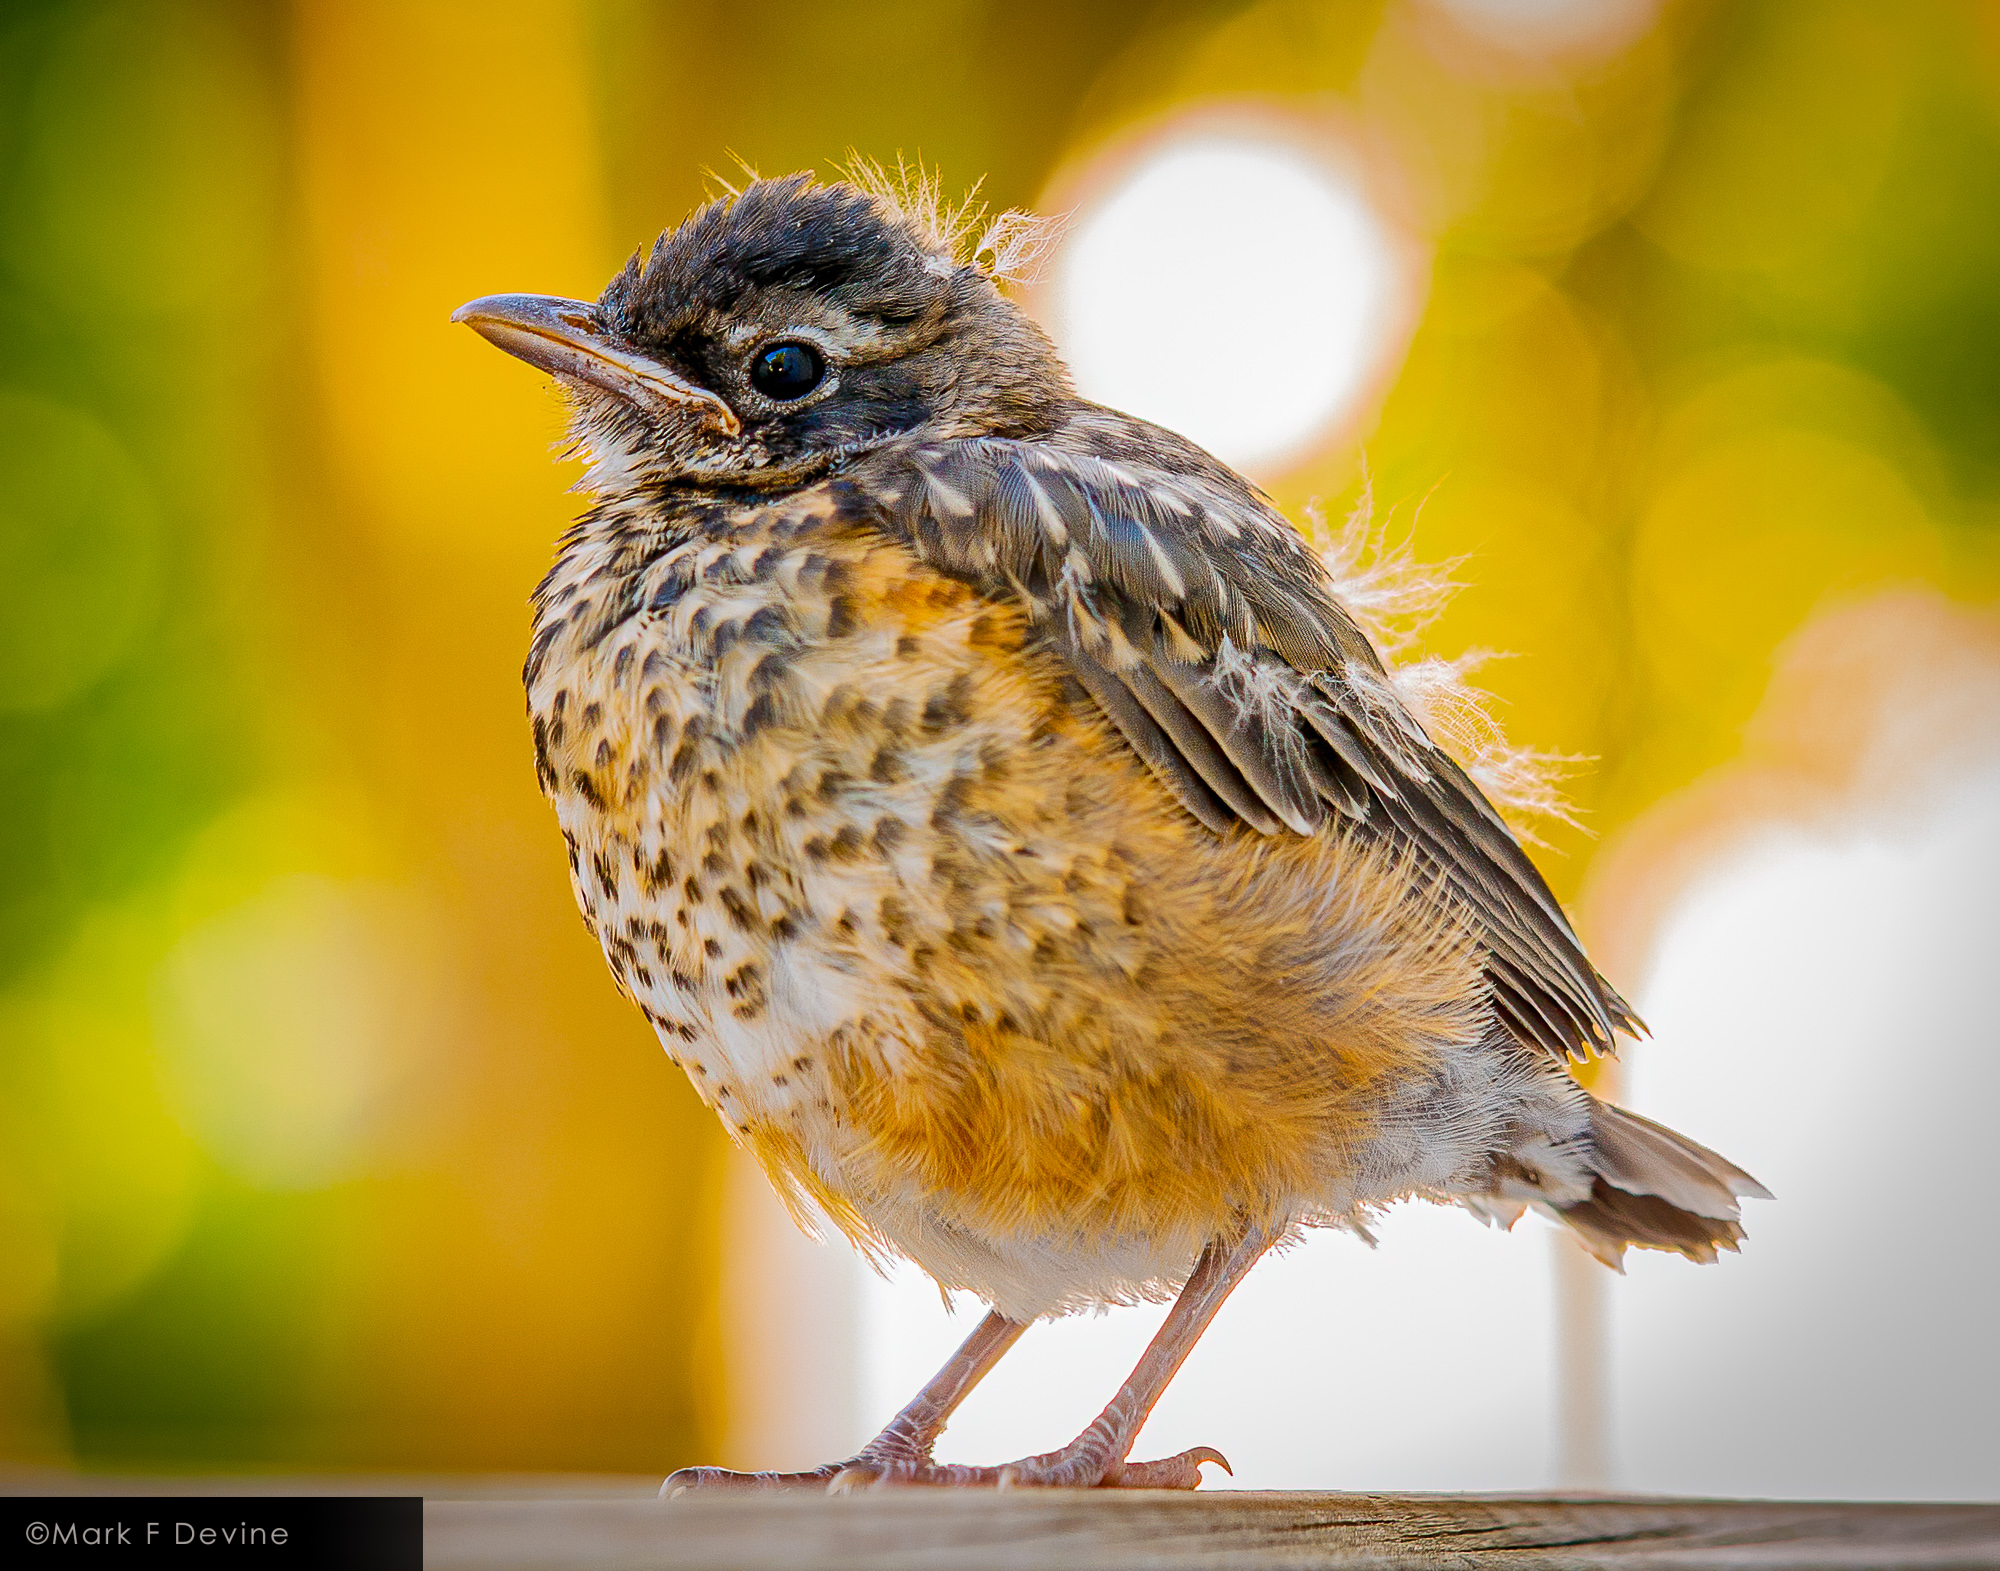 Young robin in transition between scruffy fluff and proper plumage.